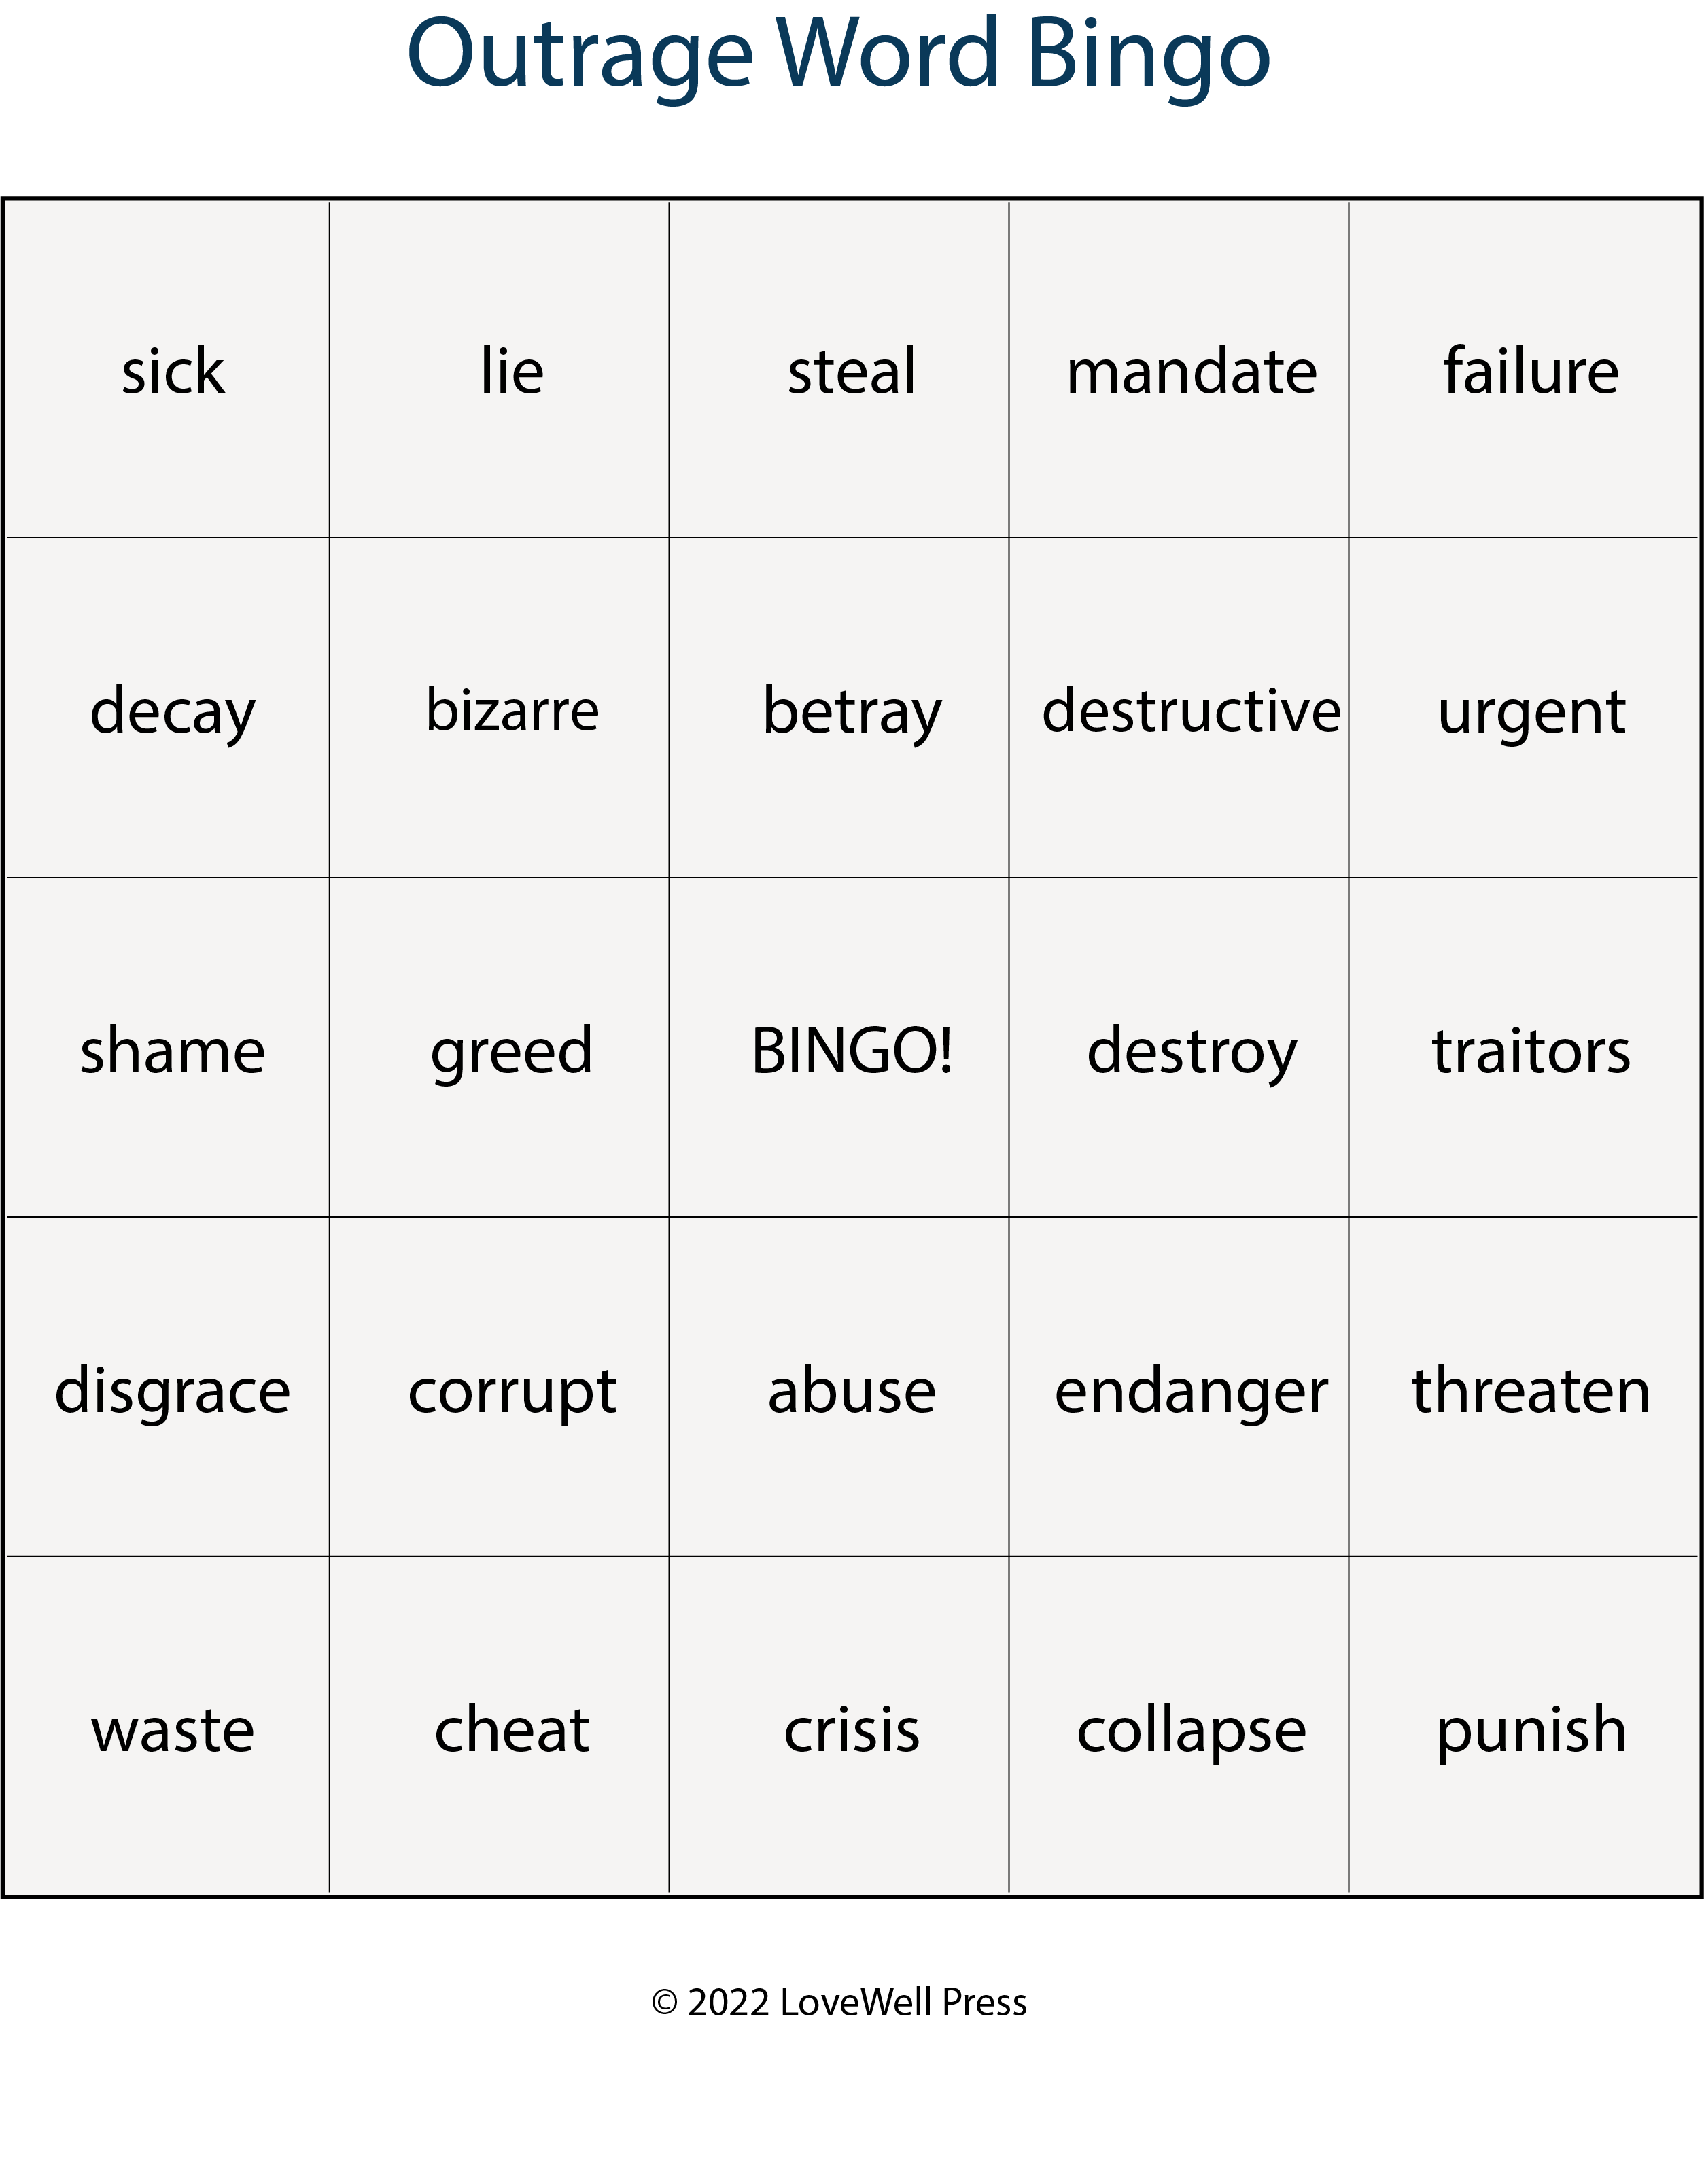 Outrage Word Bingo from the book, Rooted in Decency